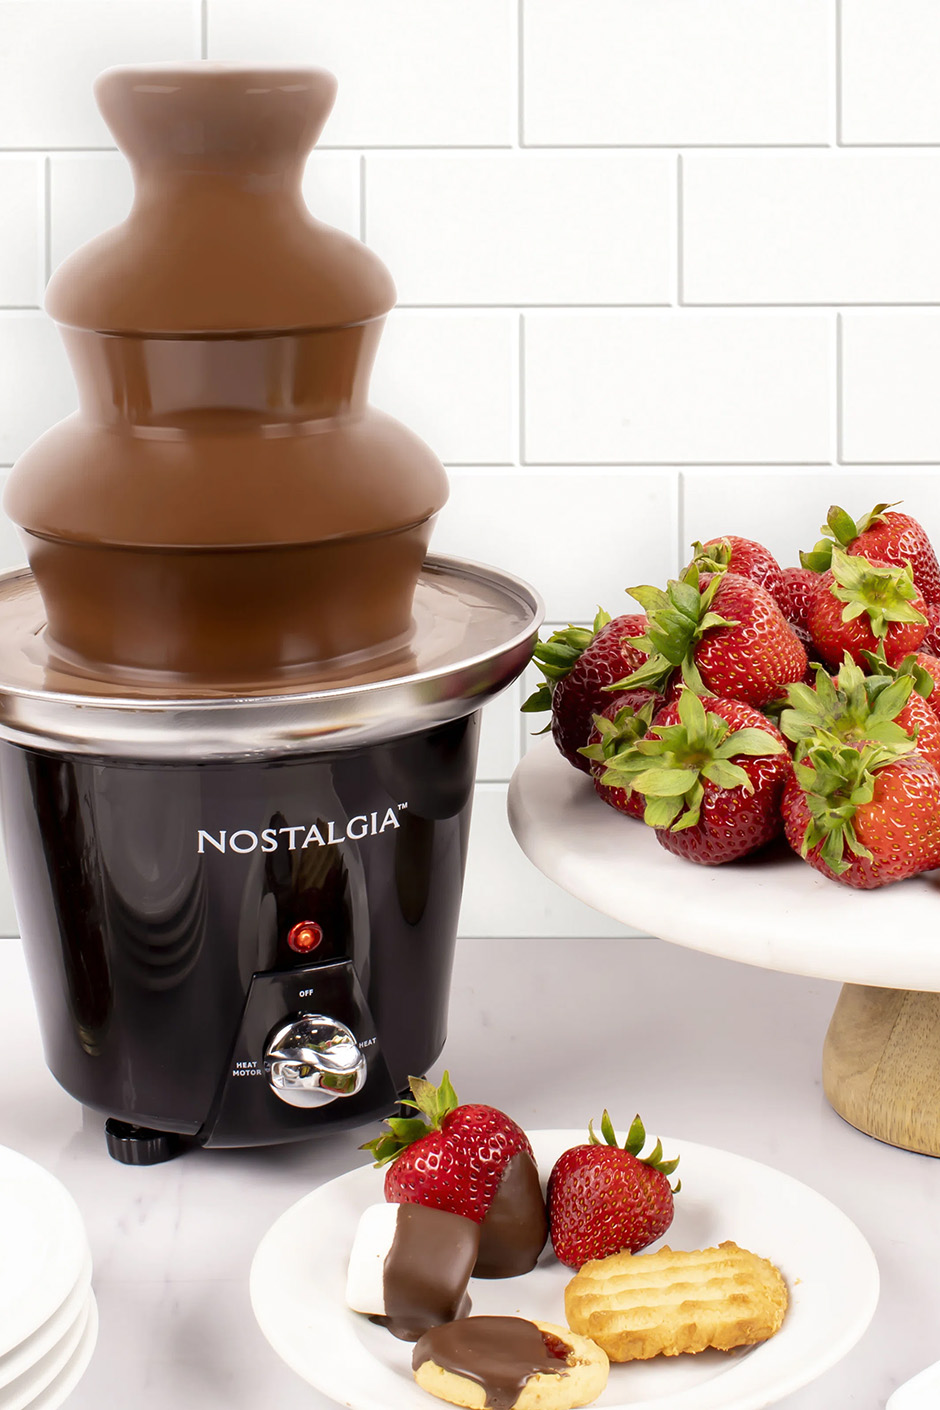 Image of three tier chocolate foundation from wayfair with strawberries